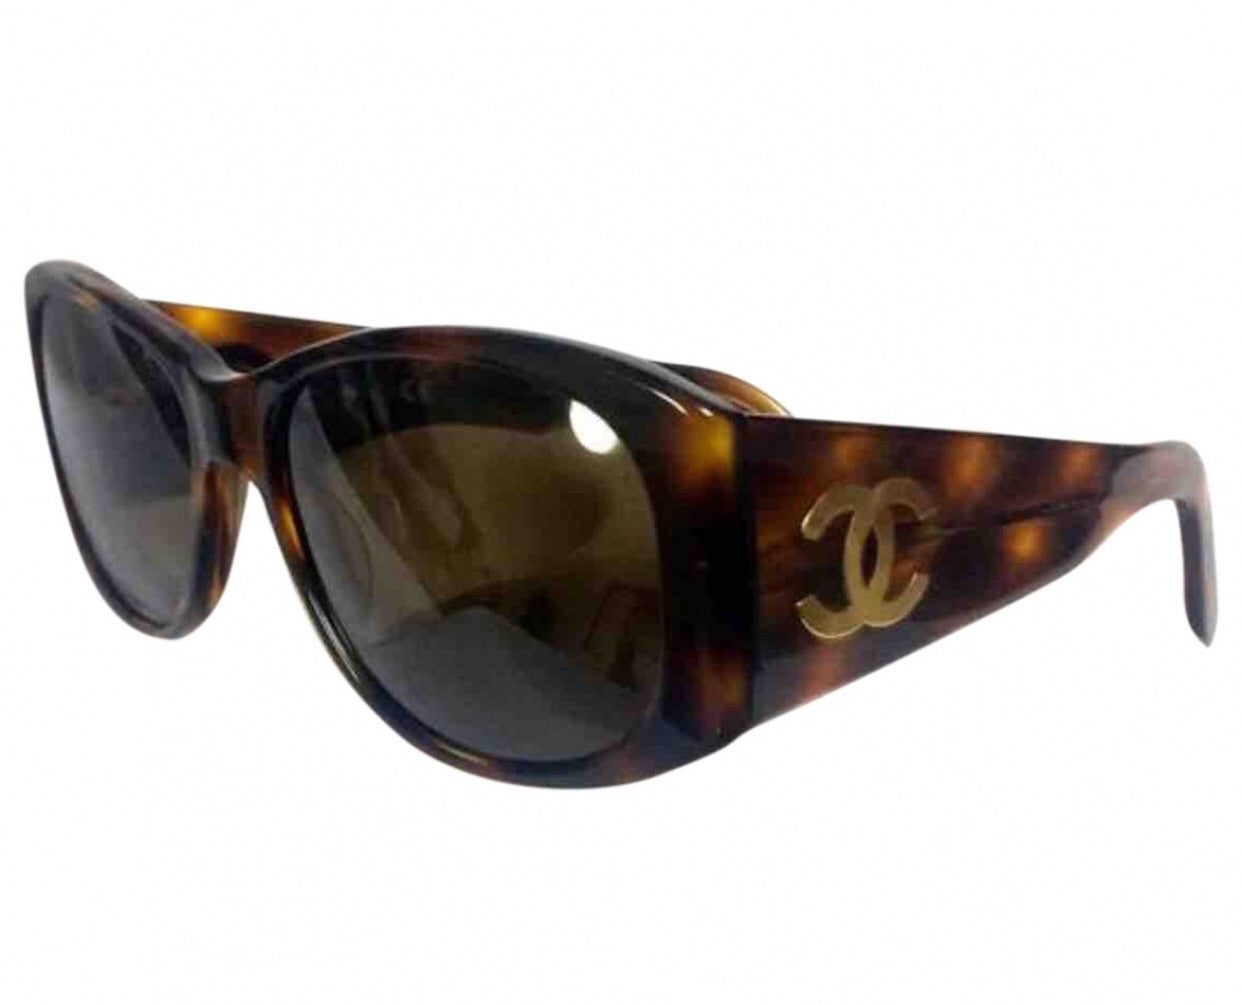 Vintage CHANEL brown frame sunglasses with large CC charms at sides. Mod and chic eyewear you must get.